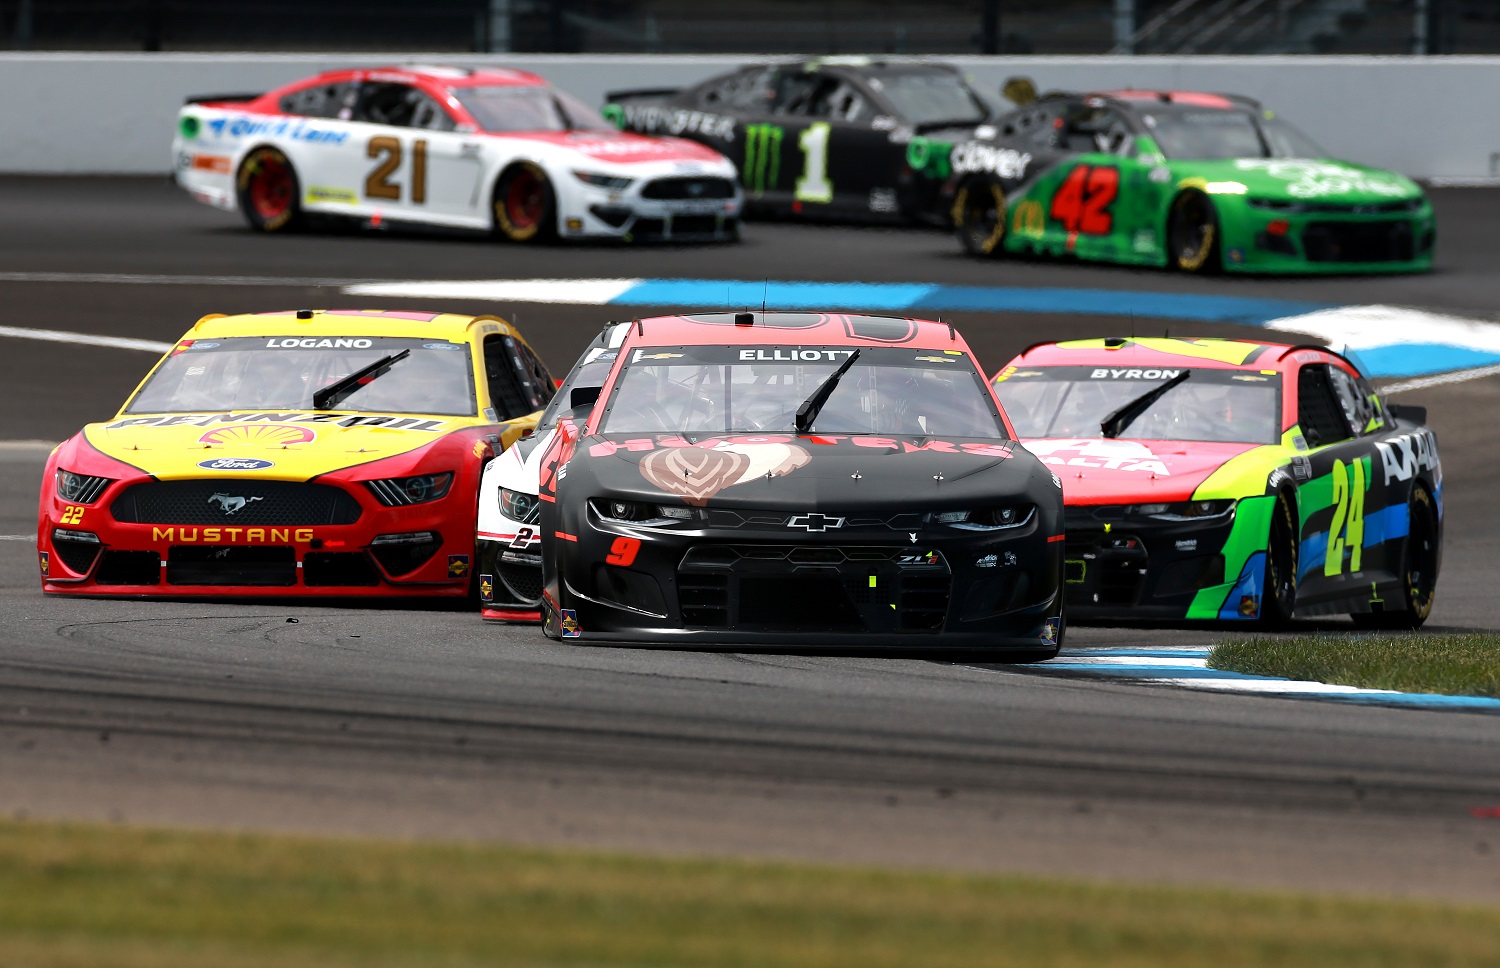 Chase Elliott, Joey Logano, and William Byron race during the NASCAR Cup Series Verizon 200 at the Brickyard at Indianapolis Motor Speedway on Aug. 15, 2021. | Sean Gardner/Getty Images